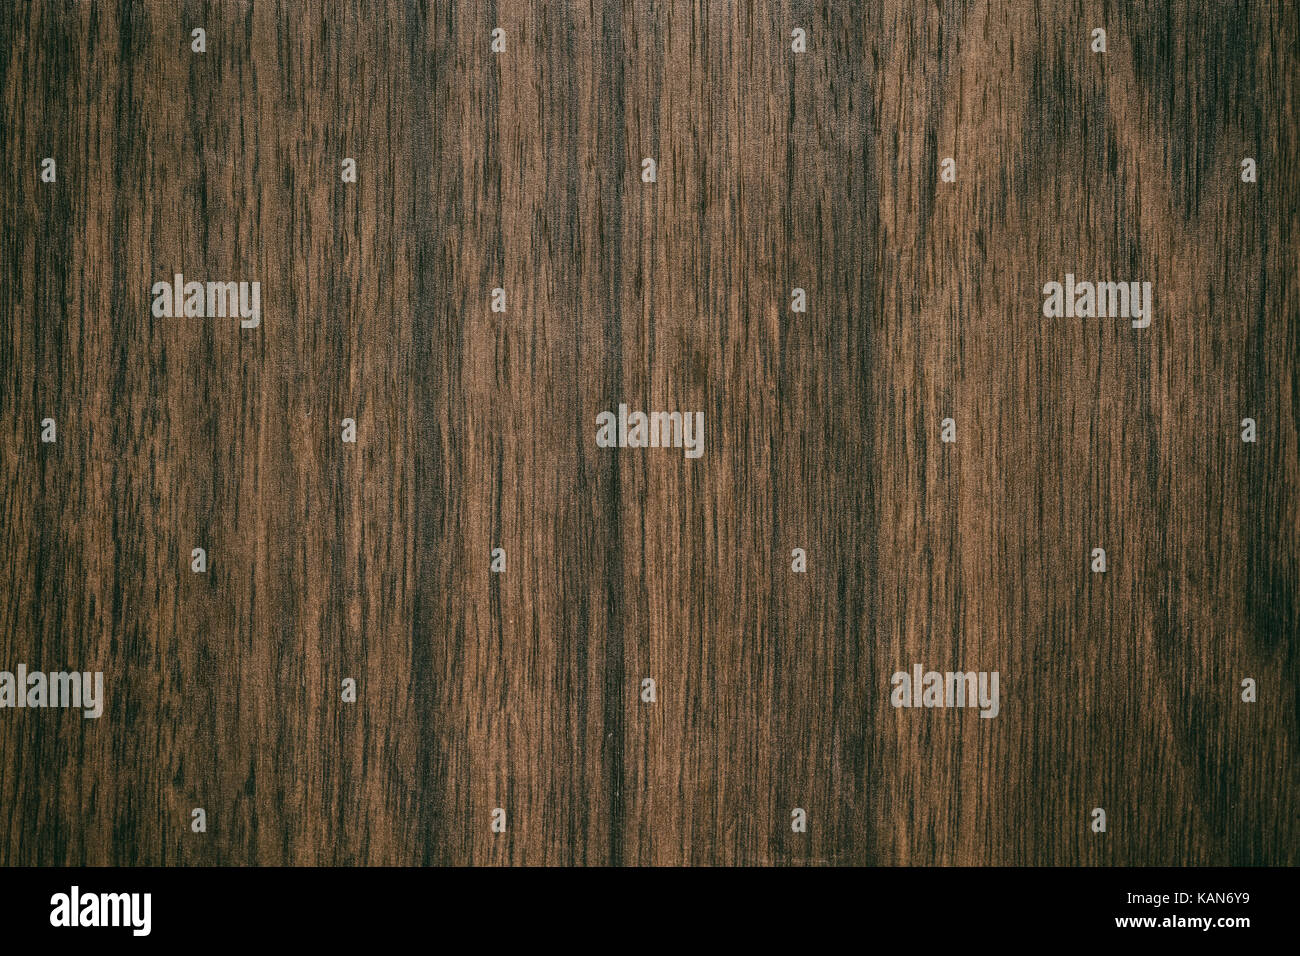 wooden table top from old boards. grunge wood texture from vintage